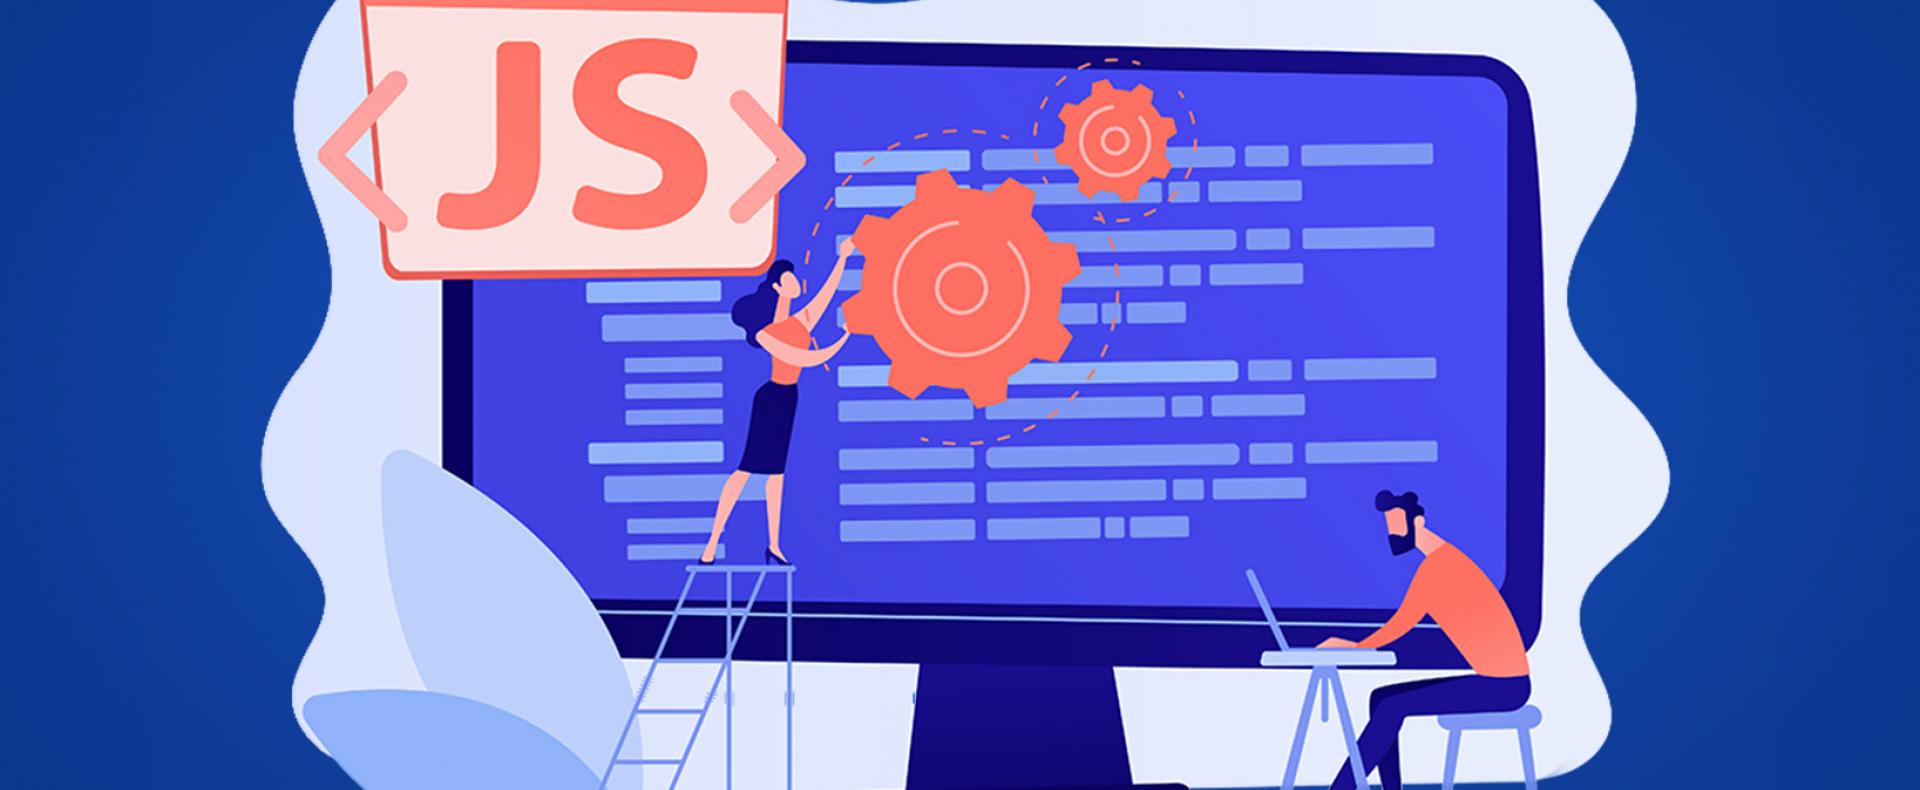 10 of The Most Popular Javascript Frameworks & Libraries for Web Development in 2021